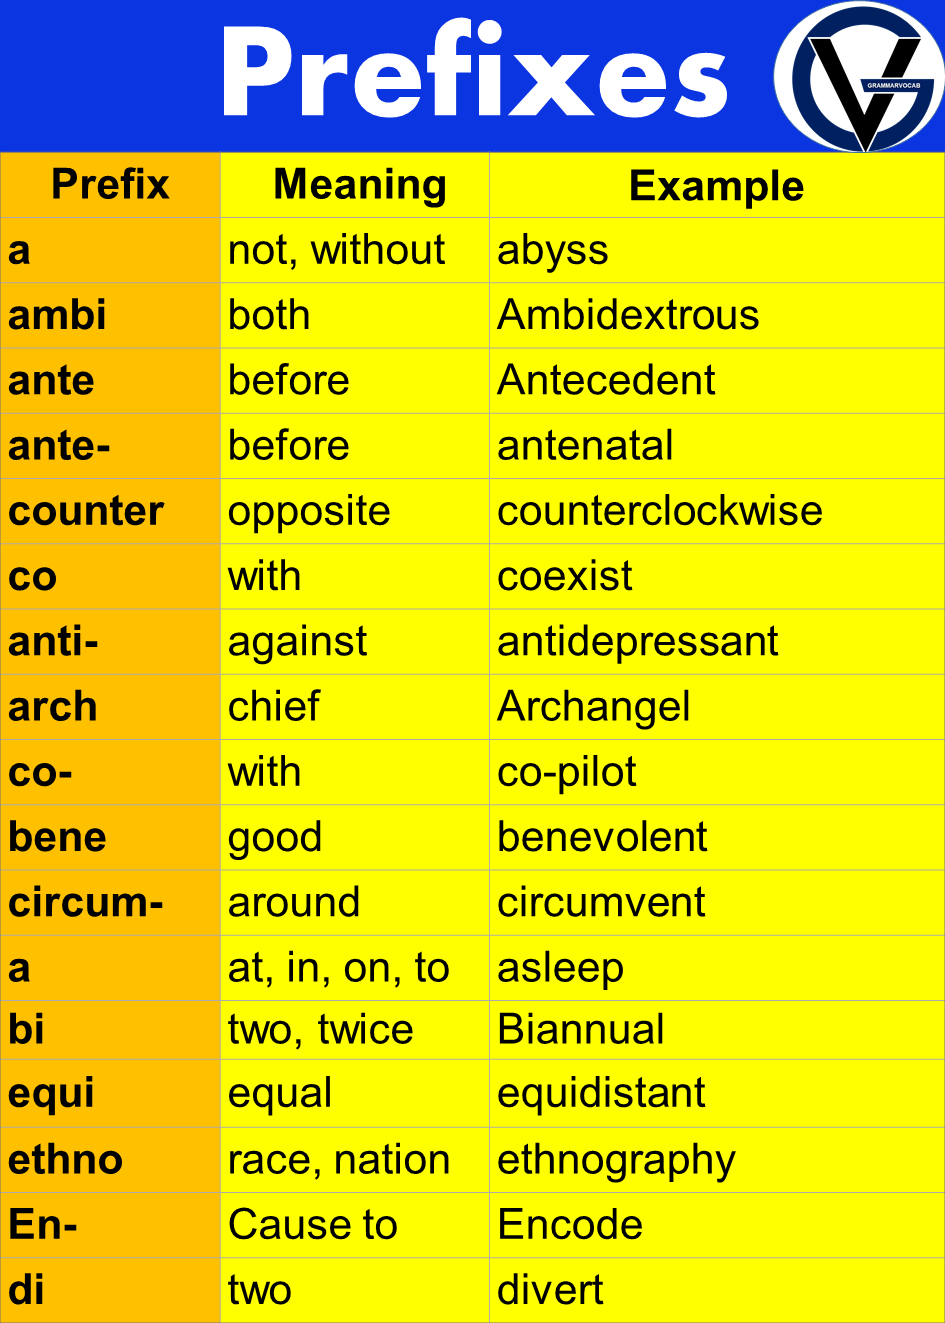 prefixes with meaning and example